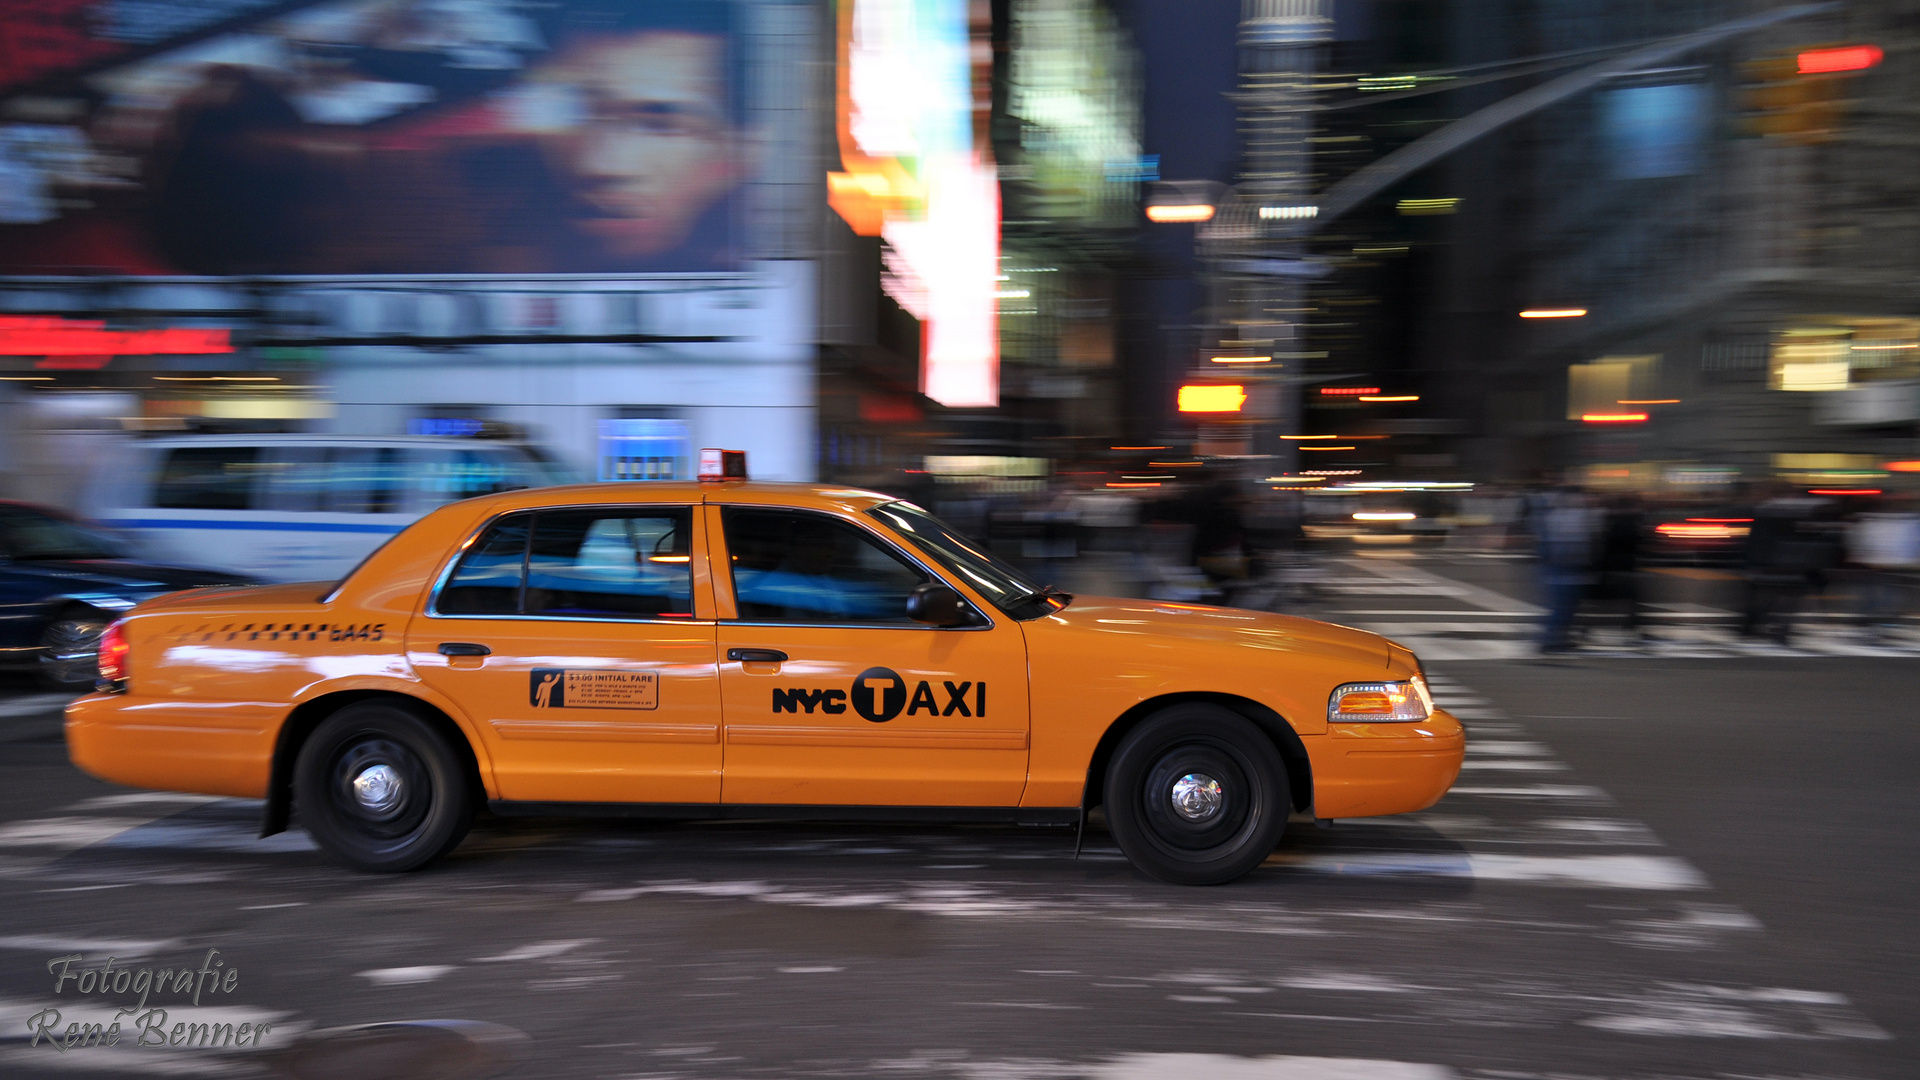 The yellow Taxi